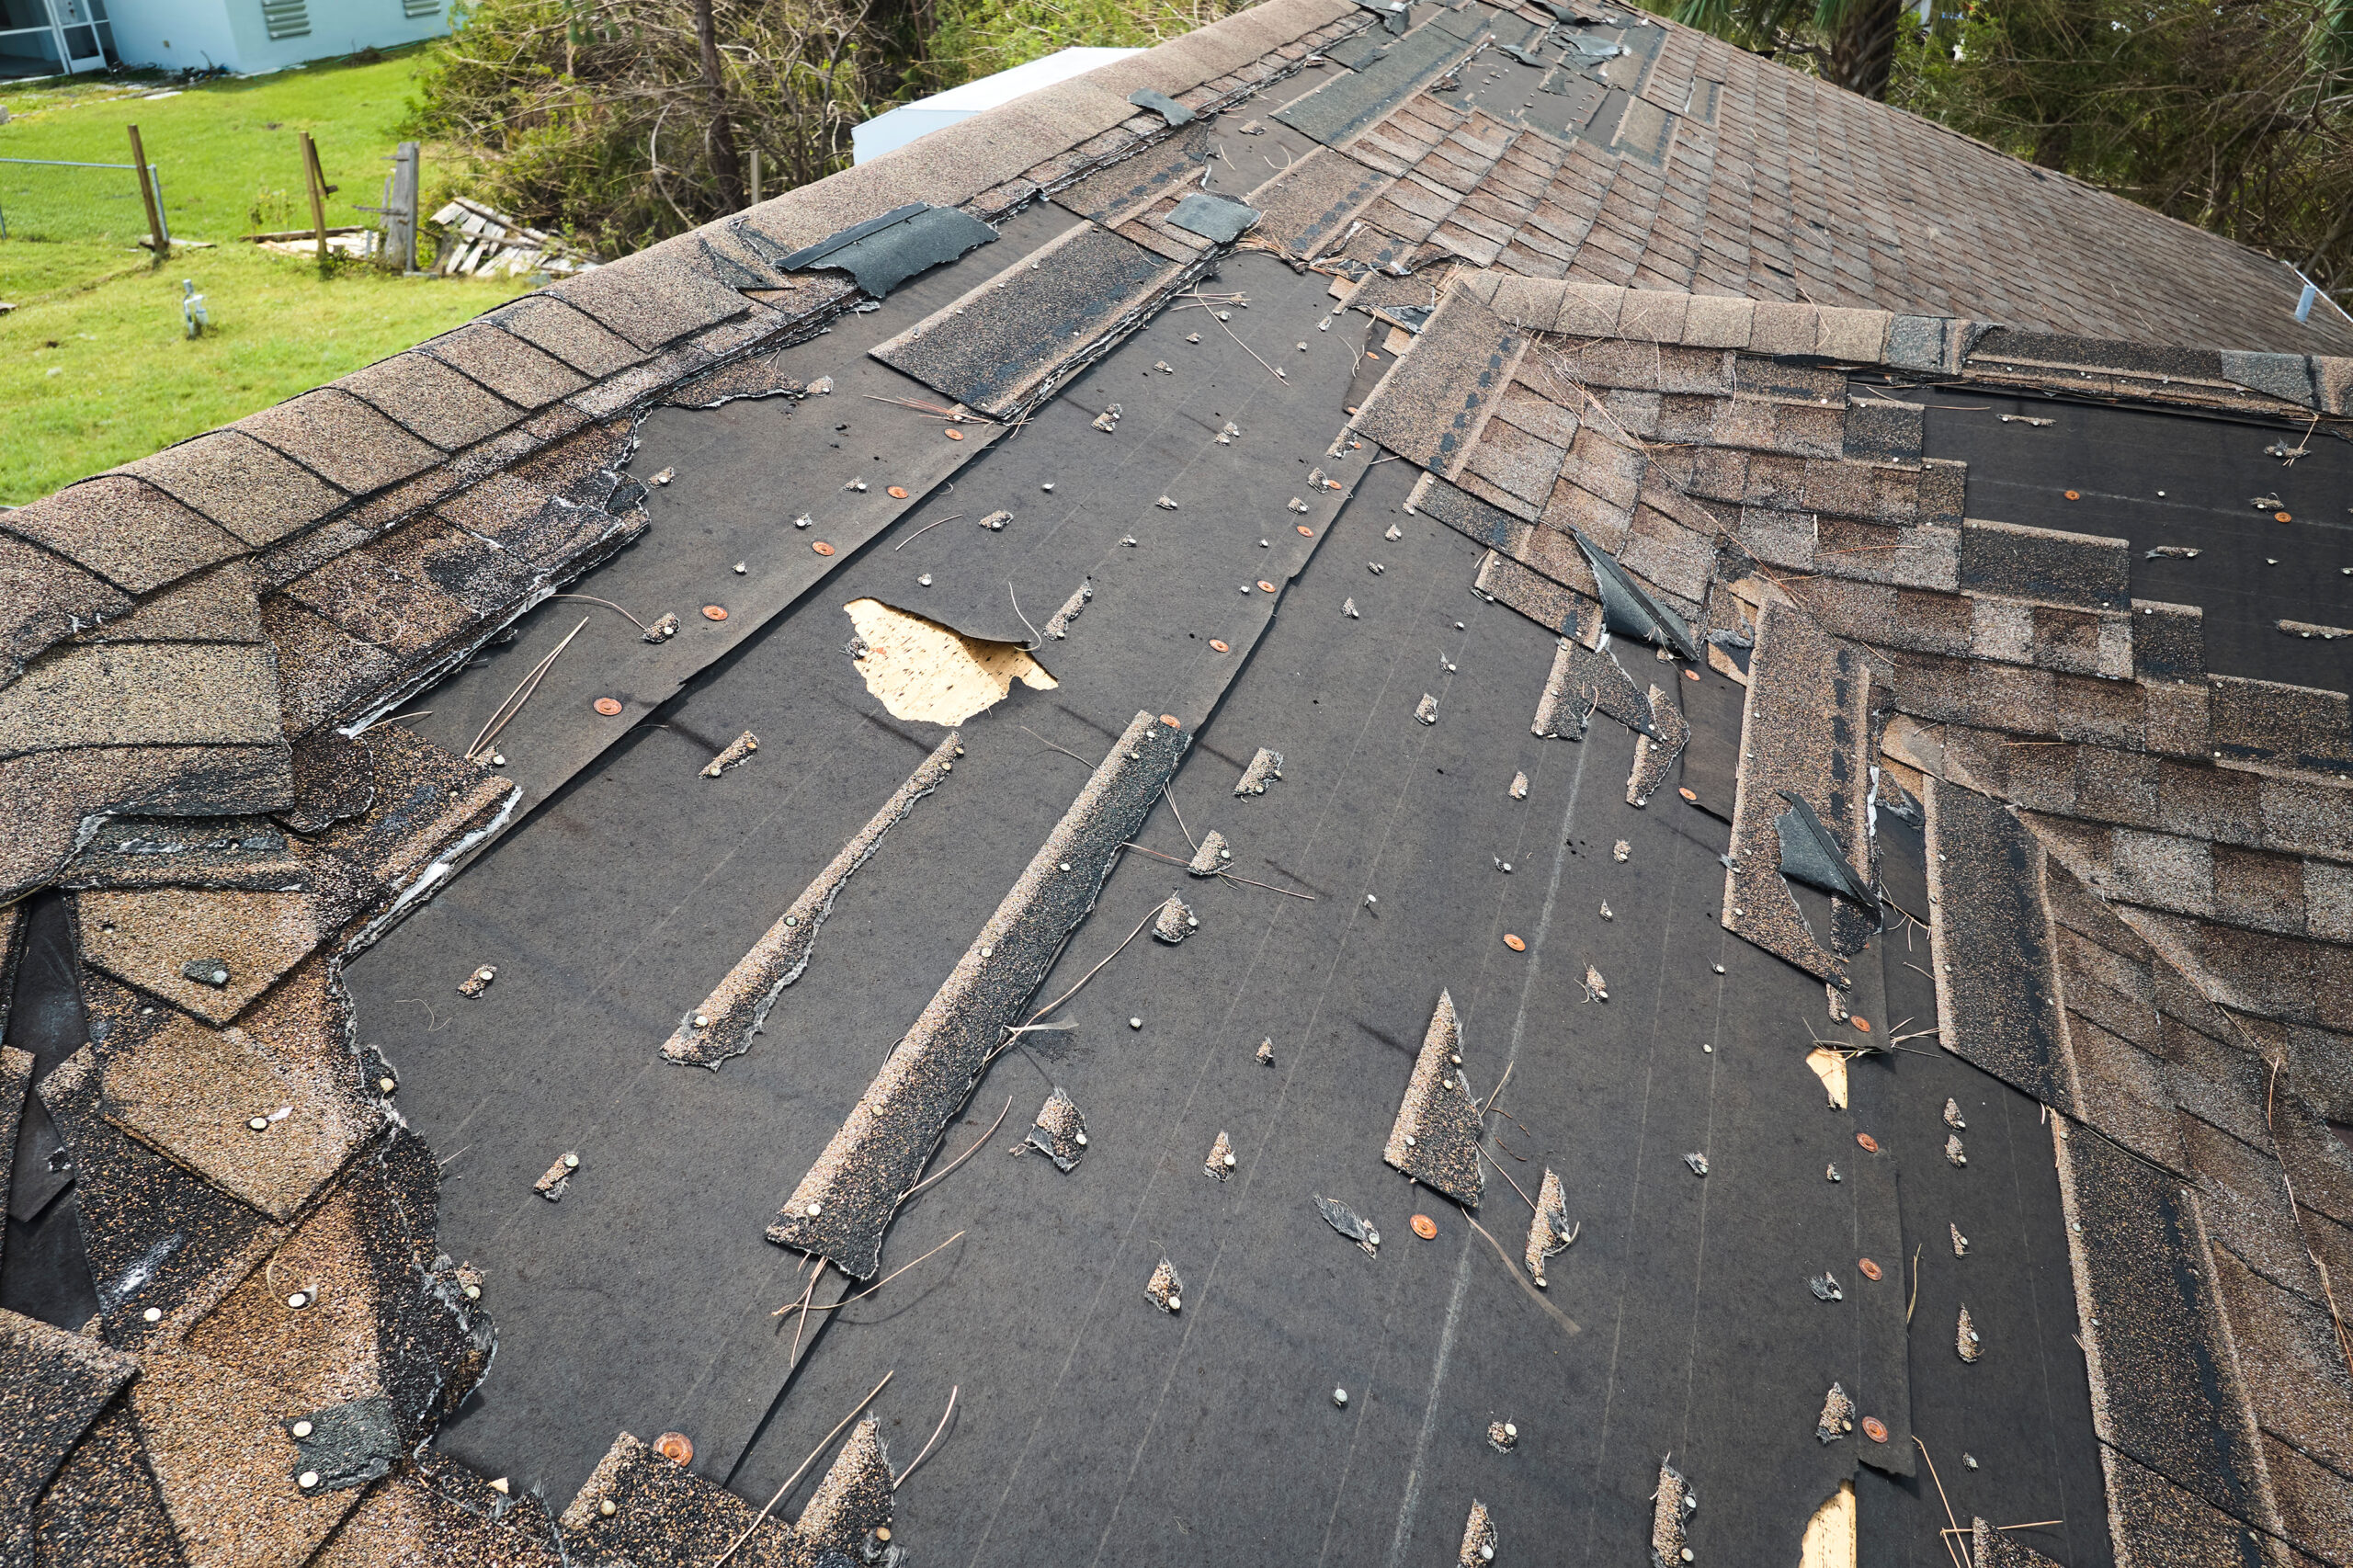 Asphalt Roof With Severe Storm Damage In Need Of Repair